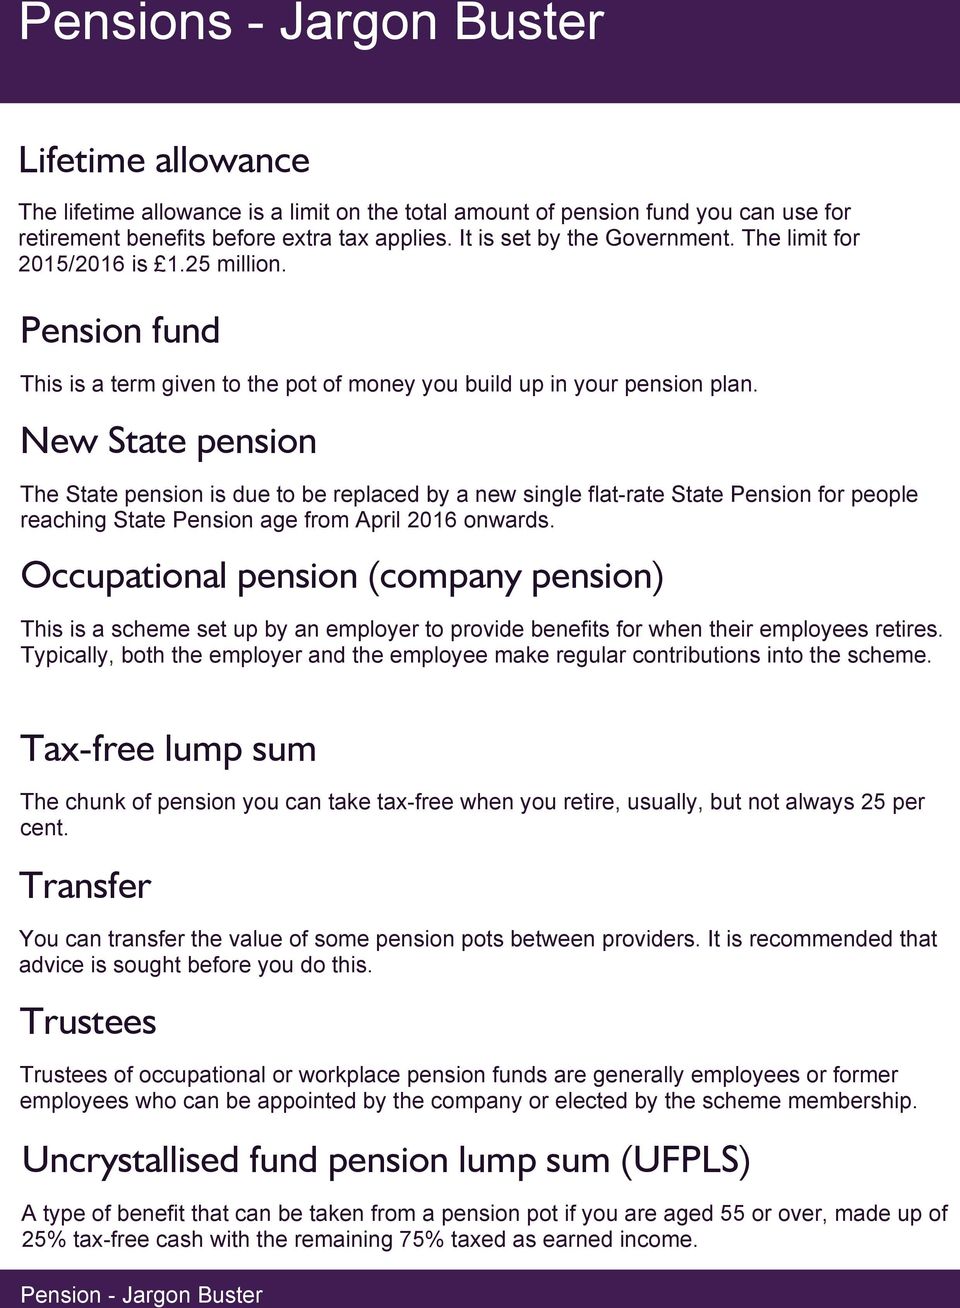 New State pension The State pension is due to be replaced by a new single flat-rate State Pension for people reaching State Pension age from April 2016 onwards.